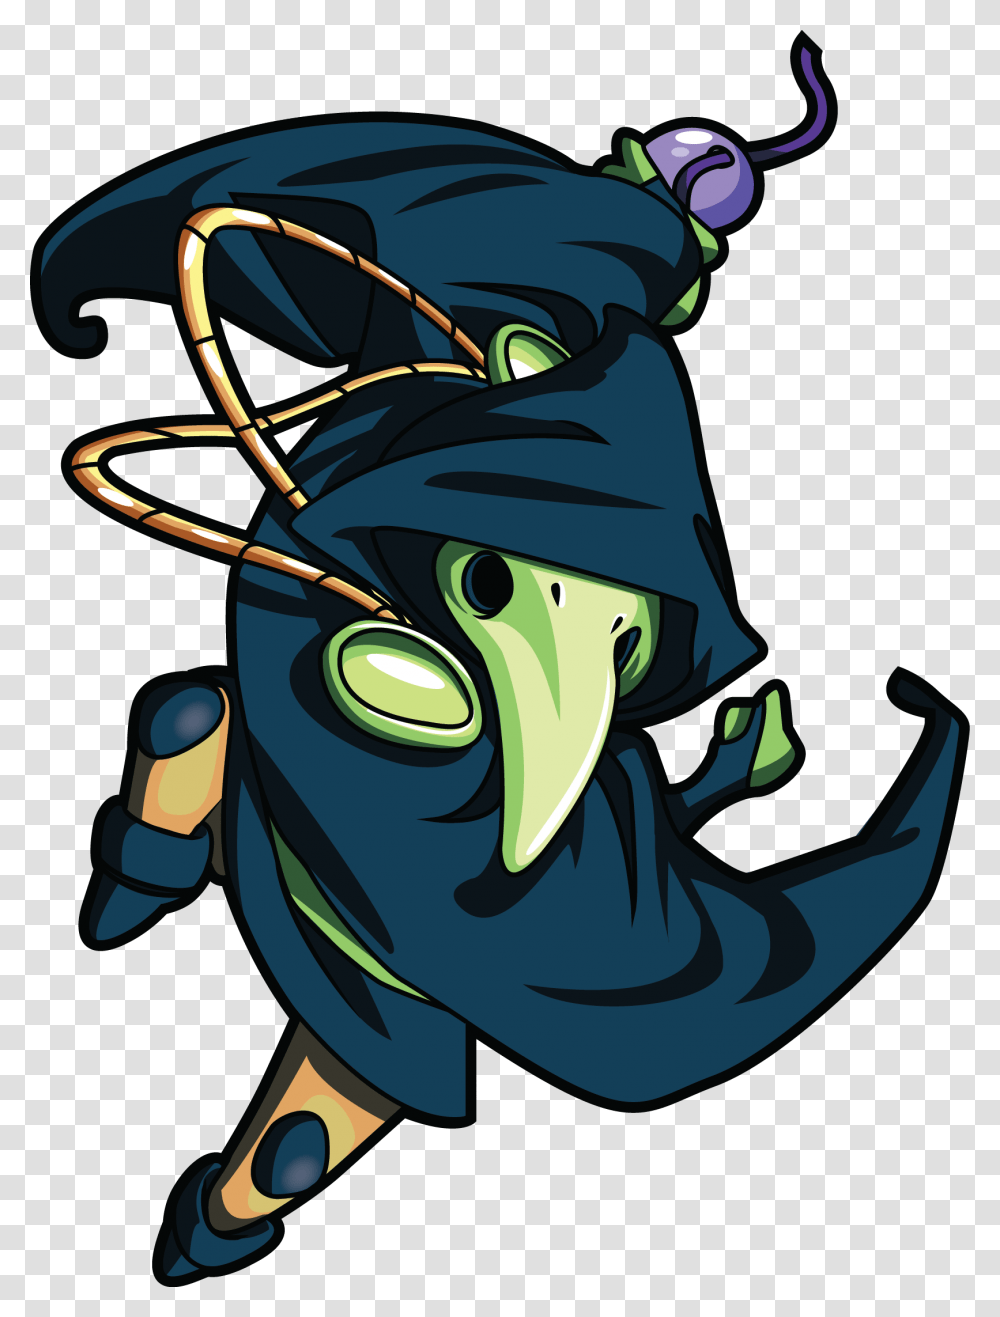 Shovel Knight Plague Knight Plague Knight Shovel Knight, Lawn Mower, Tool Transparent Png